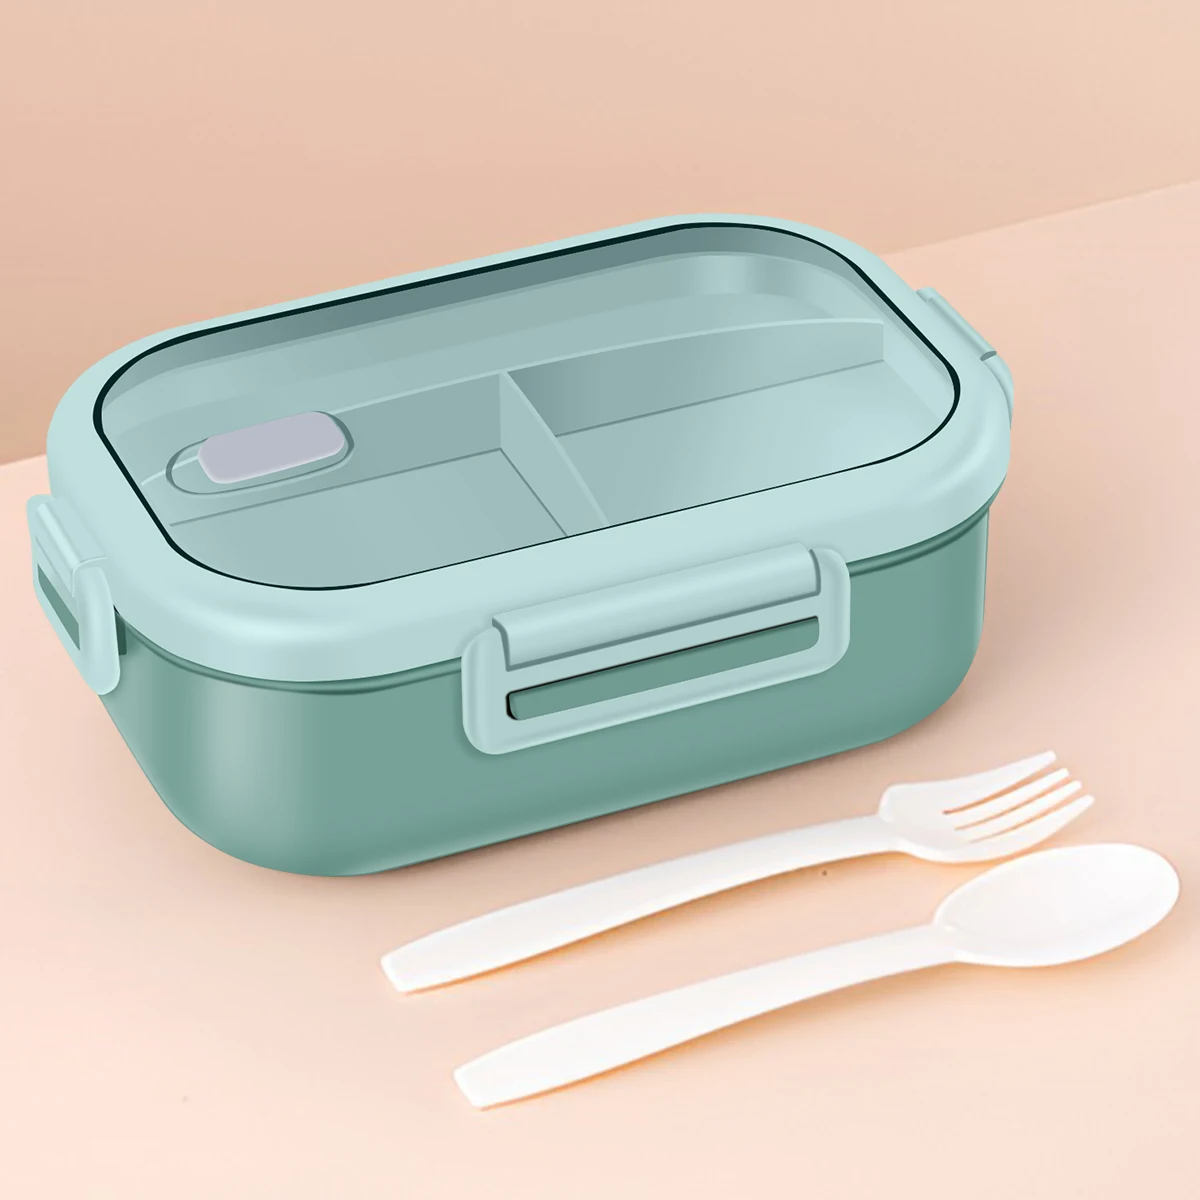 850ml Bento Box Lunch Box Leak-Proof Bento Lunch Box Lunch Food Container with 3 Compartments Reusable Healthy Wheat Straw Food